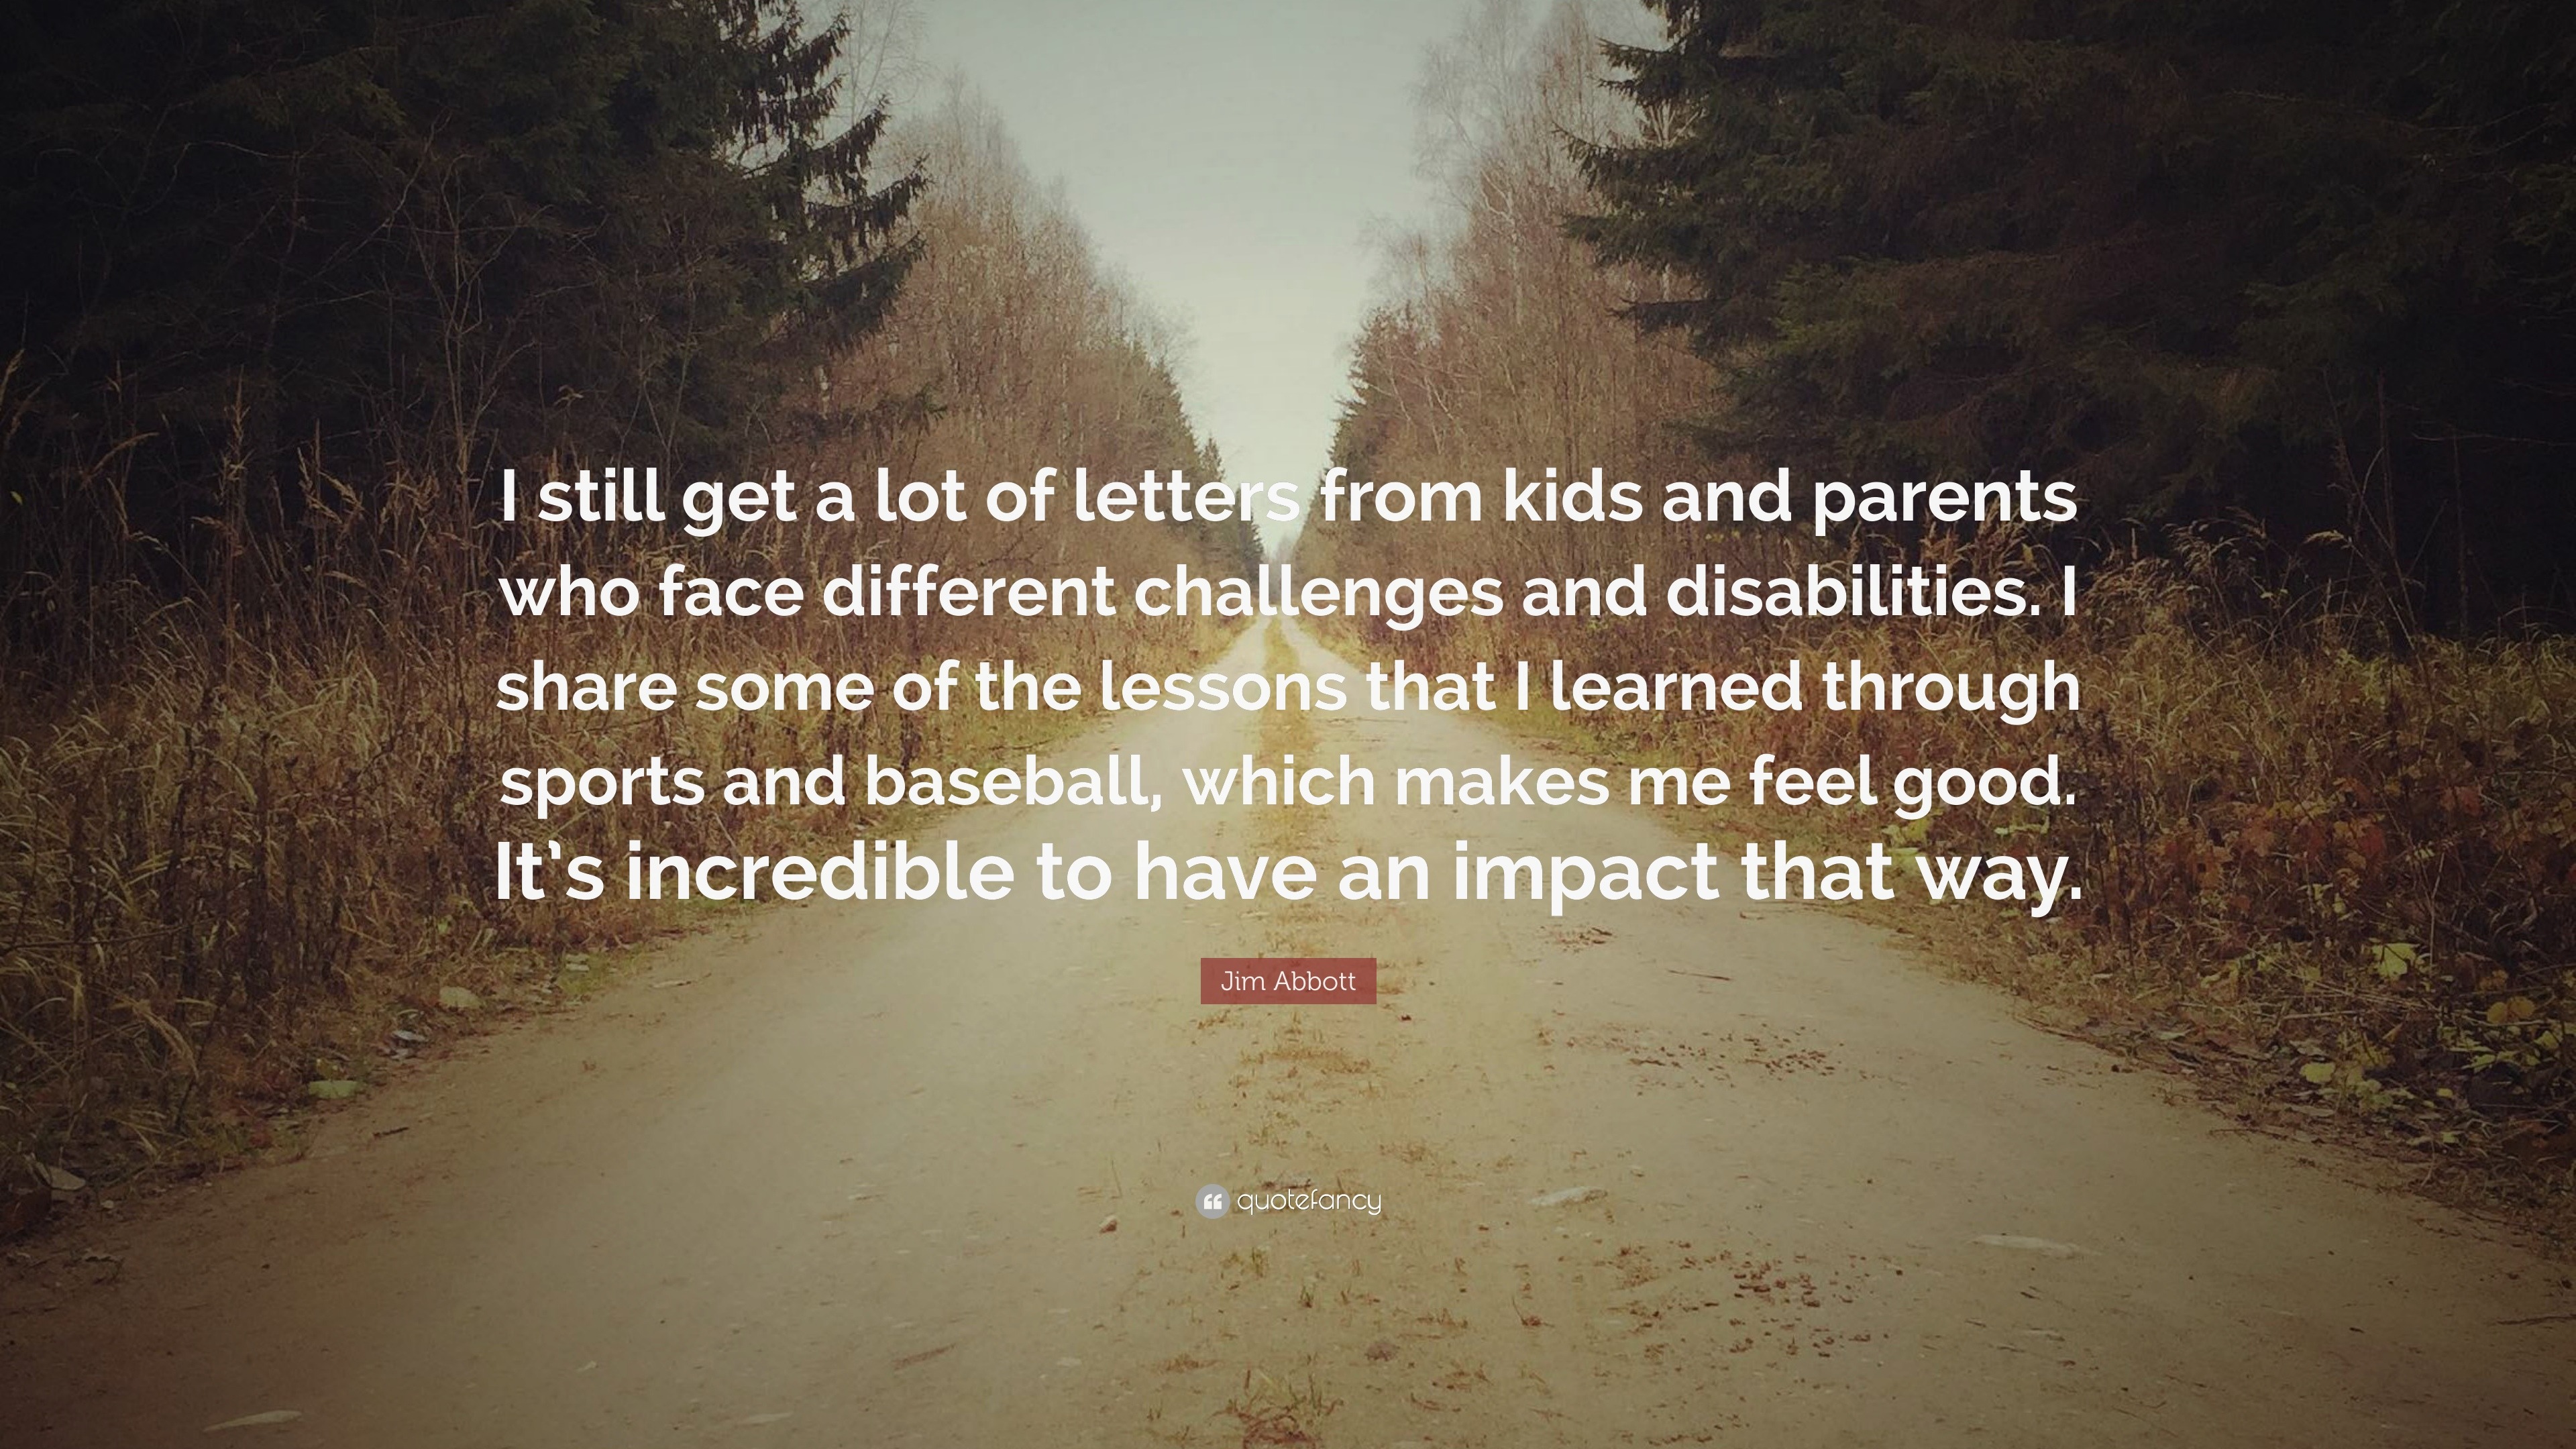 Jim Abbott Quote: “I still get a lot of letters from kids and